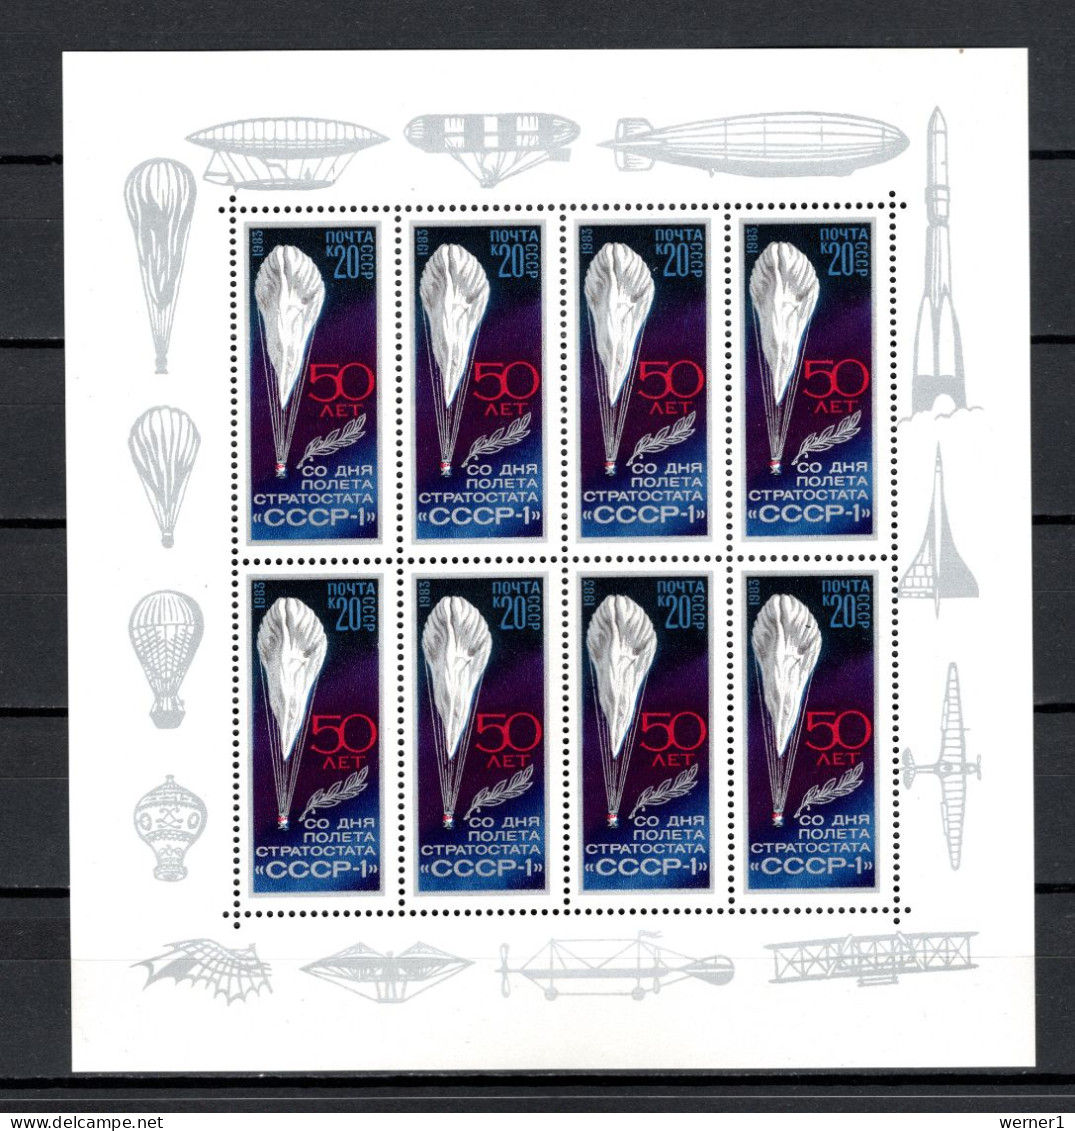 USSR Russia 1983 Space, Stratosphere Ballon Sheetlet MNH -scarce- - Russia & USSR